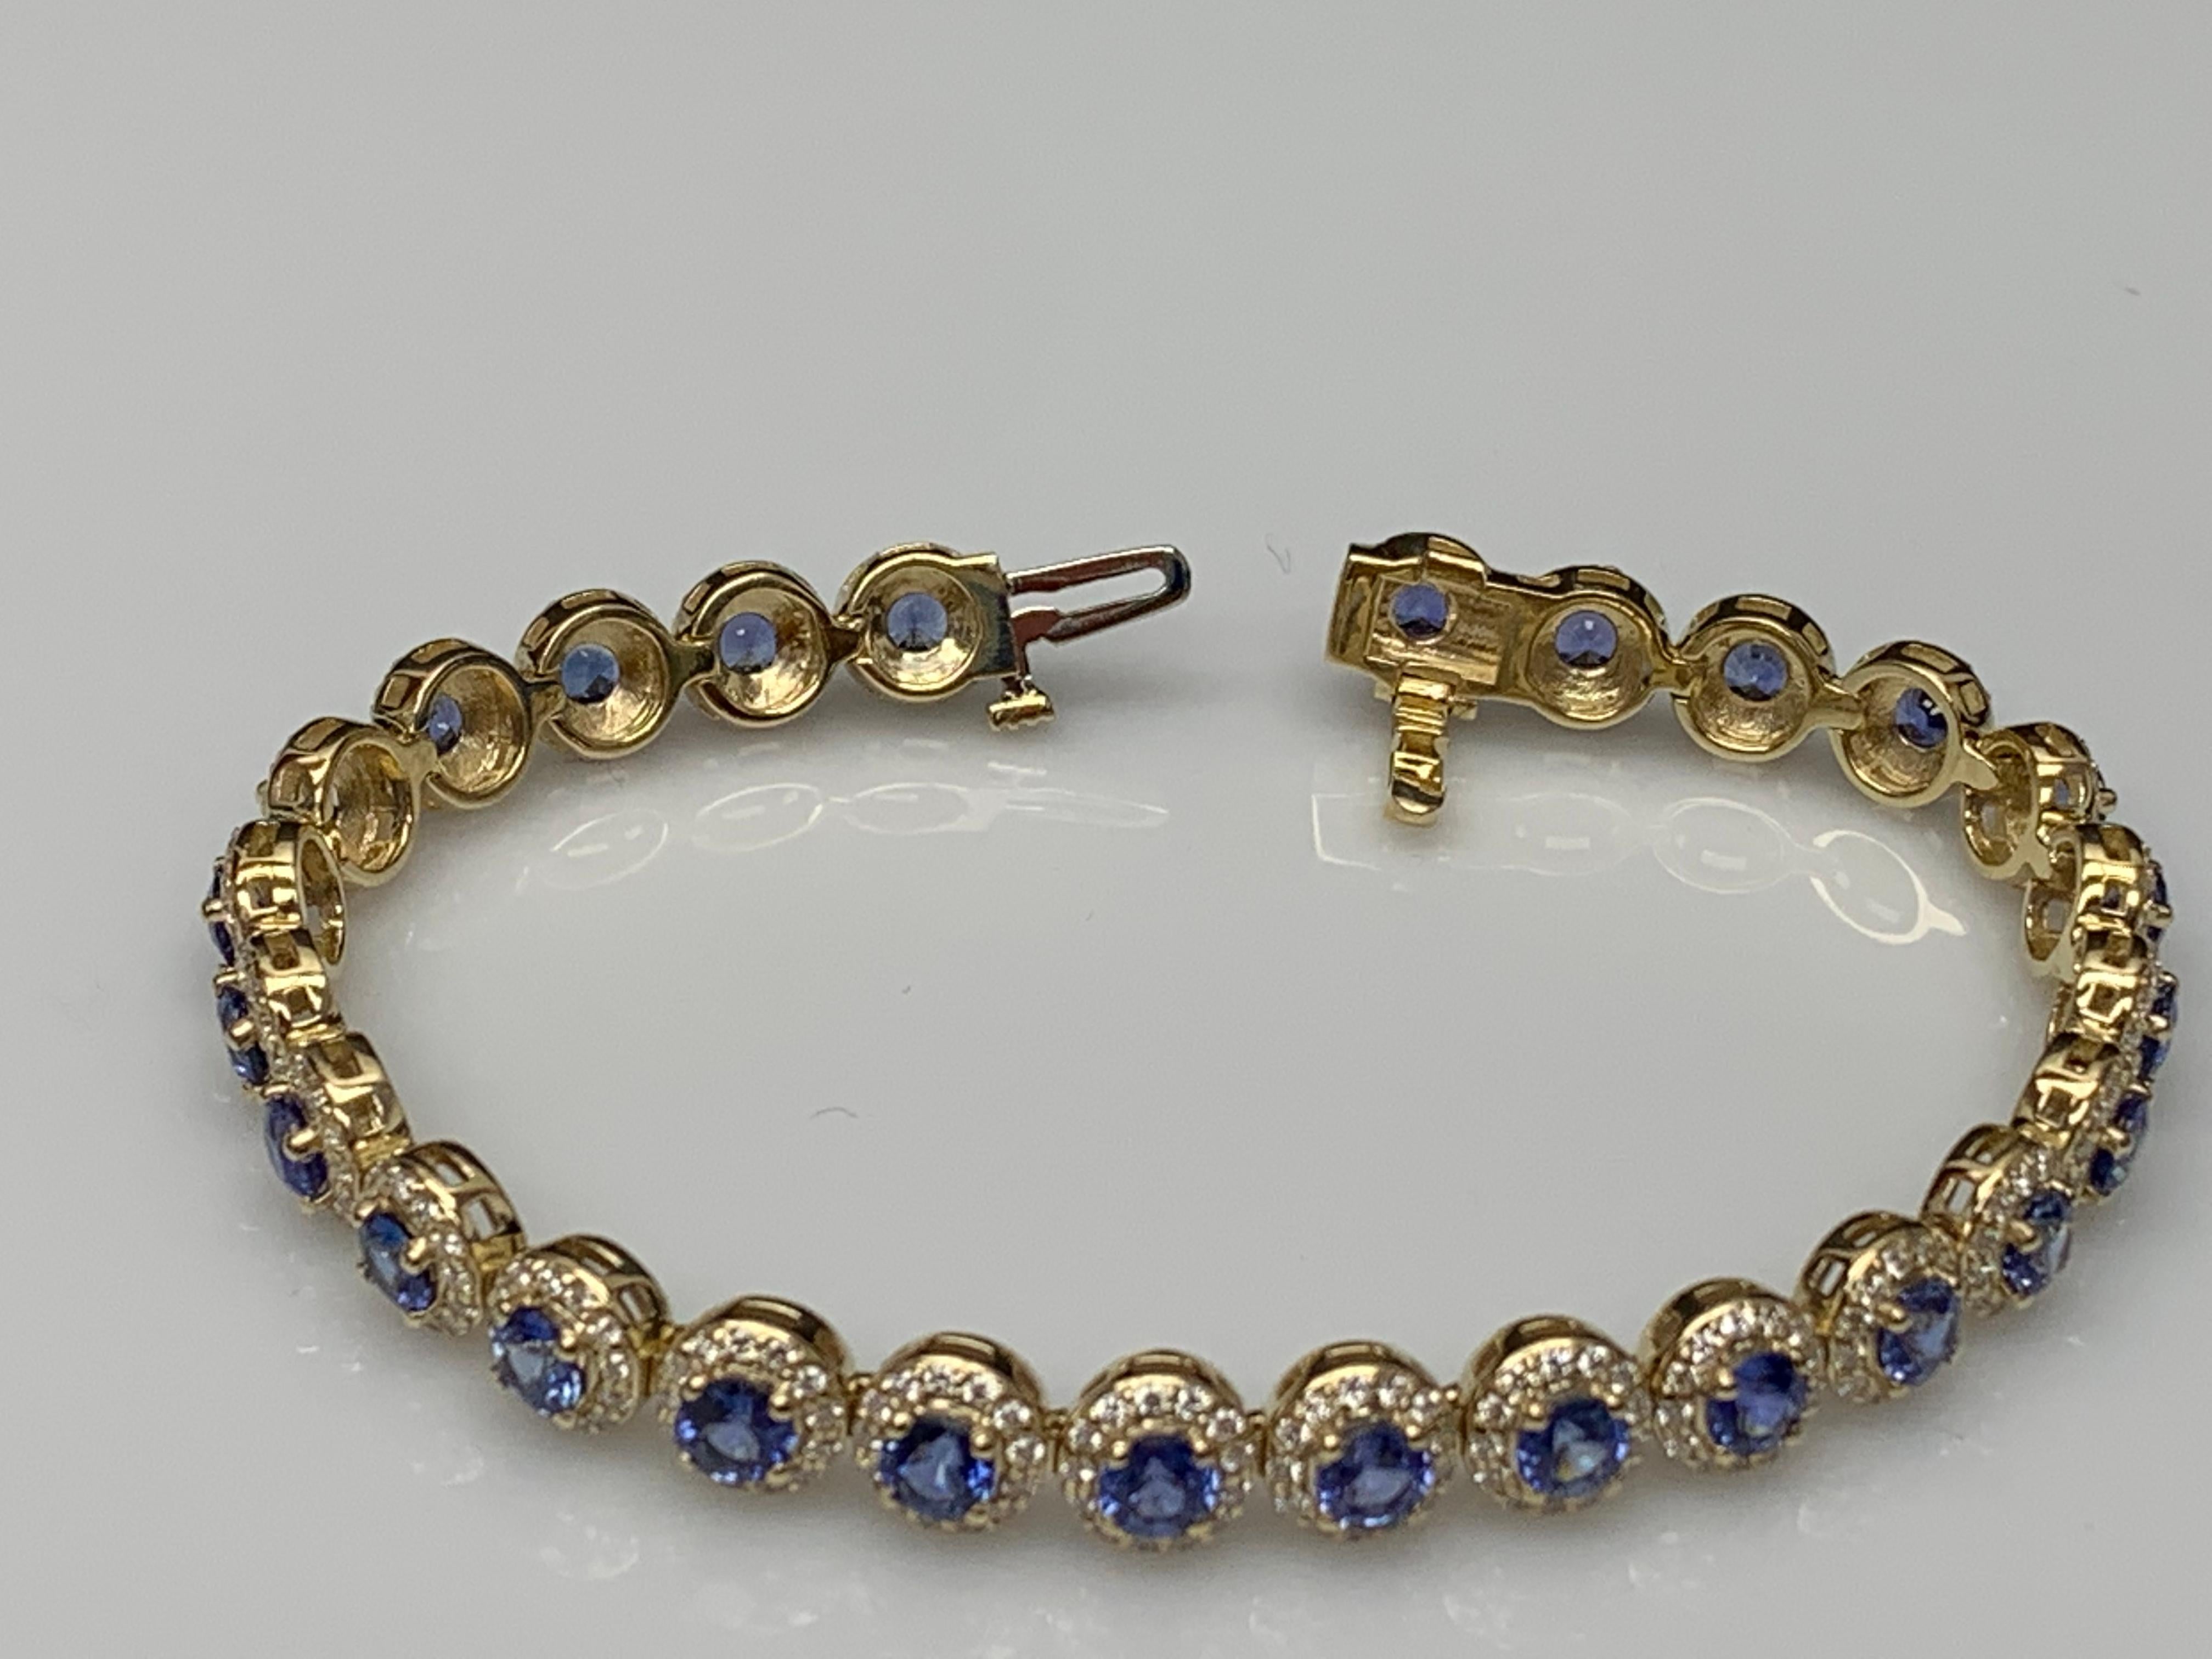 7.47 Carat Blue Sapphire and Diamond Halo Tennis Bracelet in 14k Yellow Gold For Sale 8